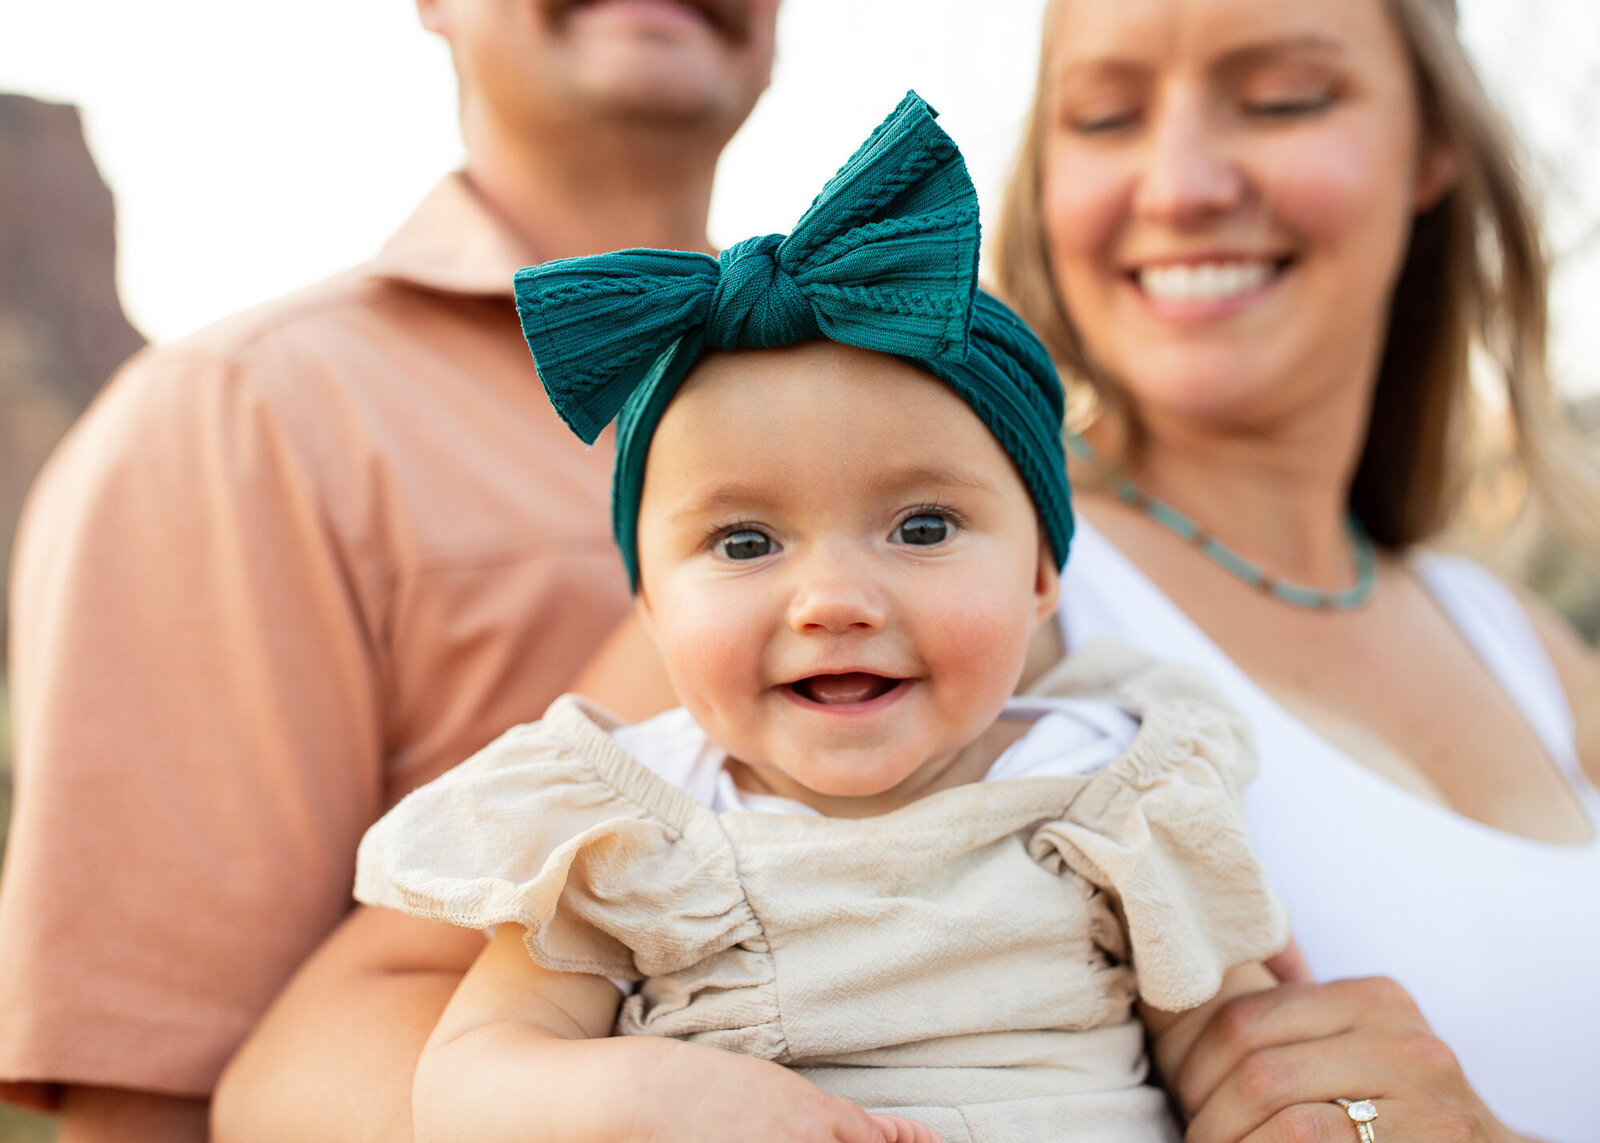 Baby smiling with big jade colored bow on while parents hold her.